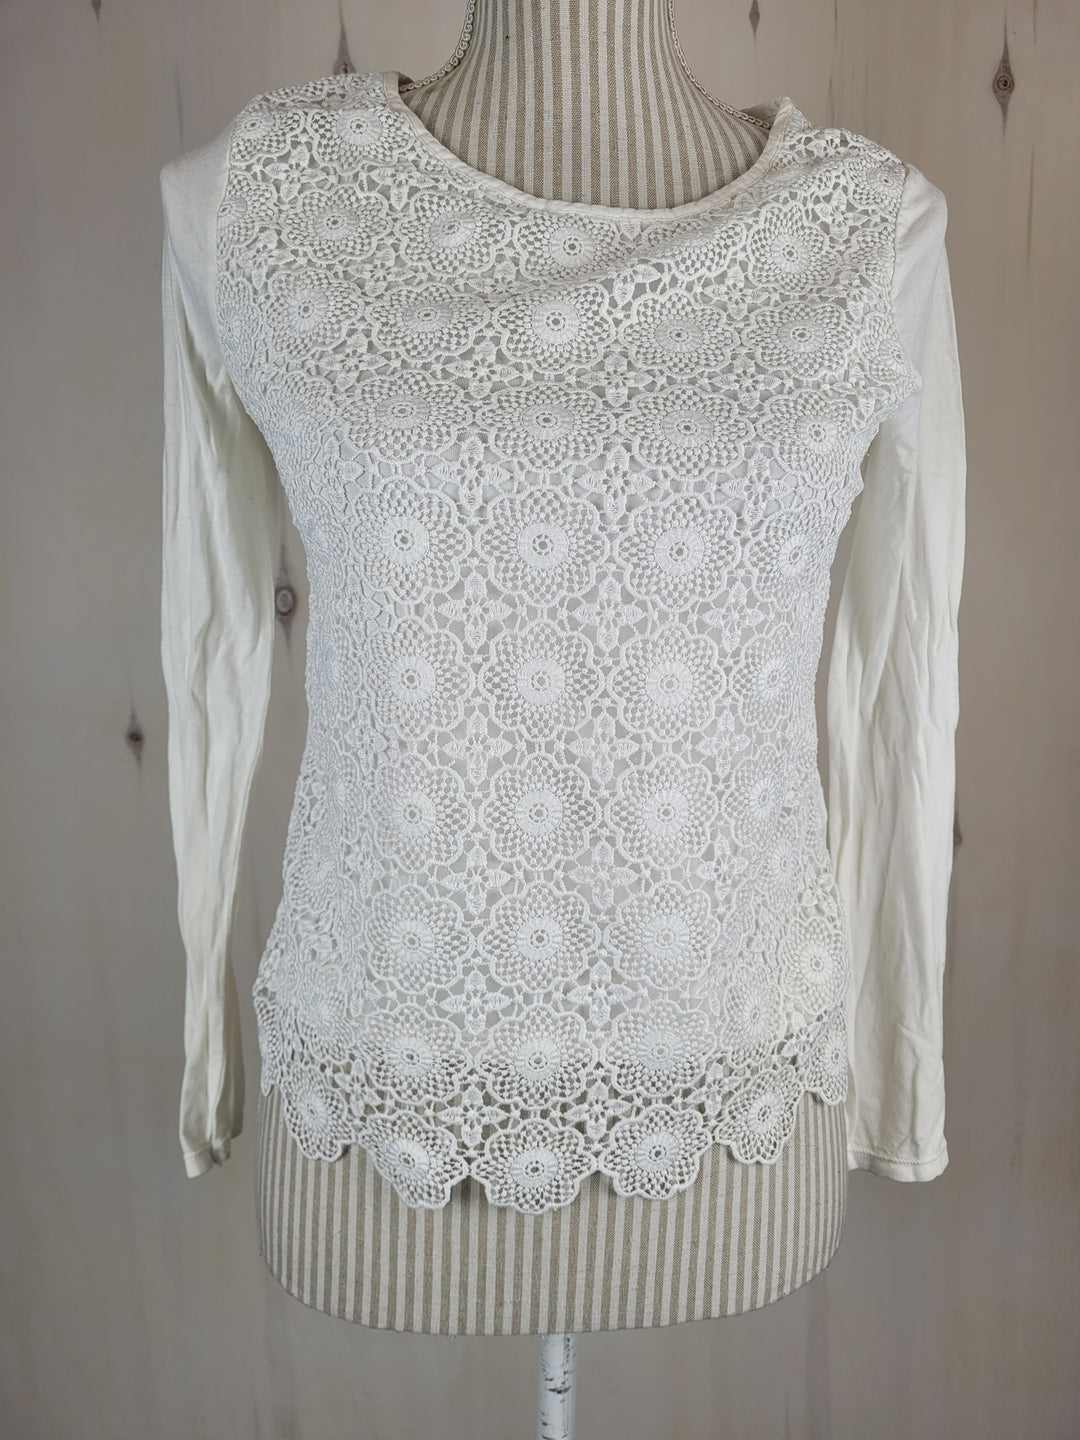 WHITE TOP WITH LACE FRONT APPROX LADIES SMALL VGUC